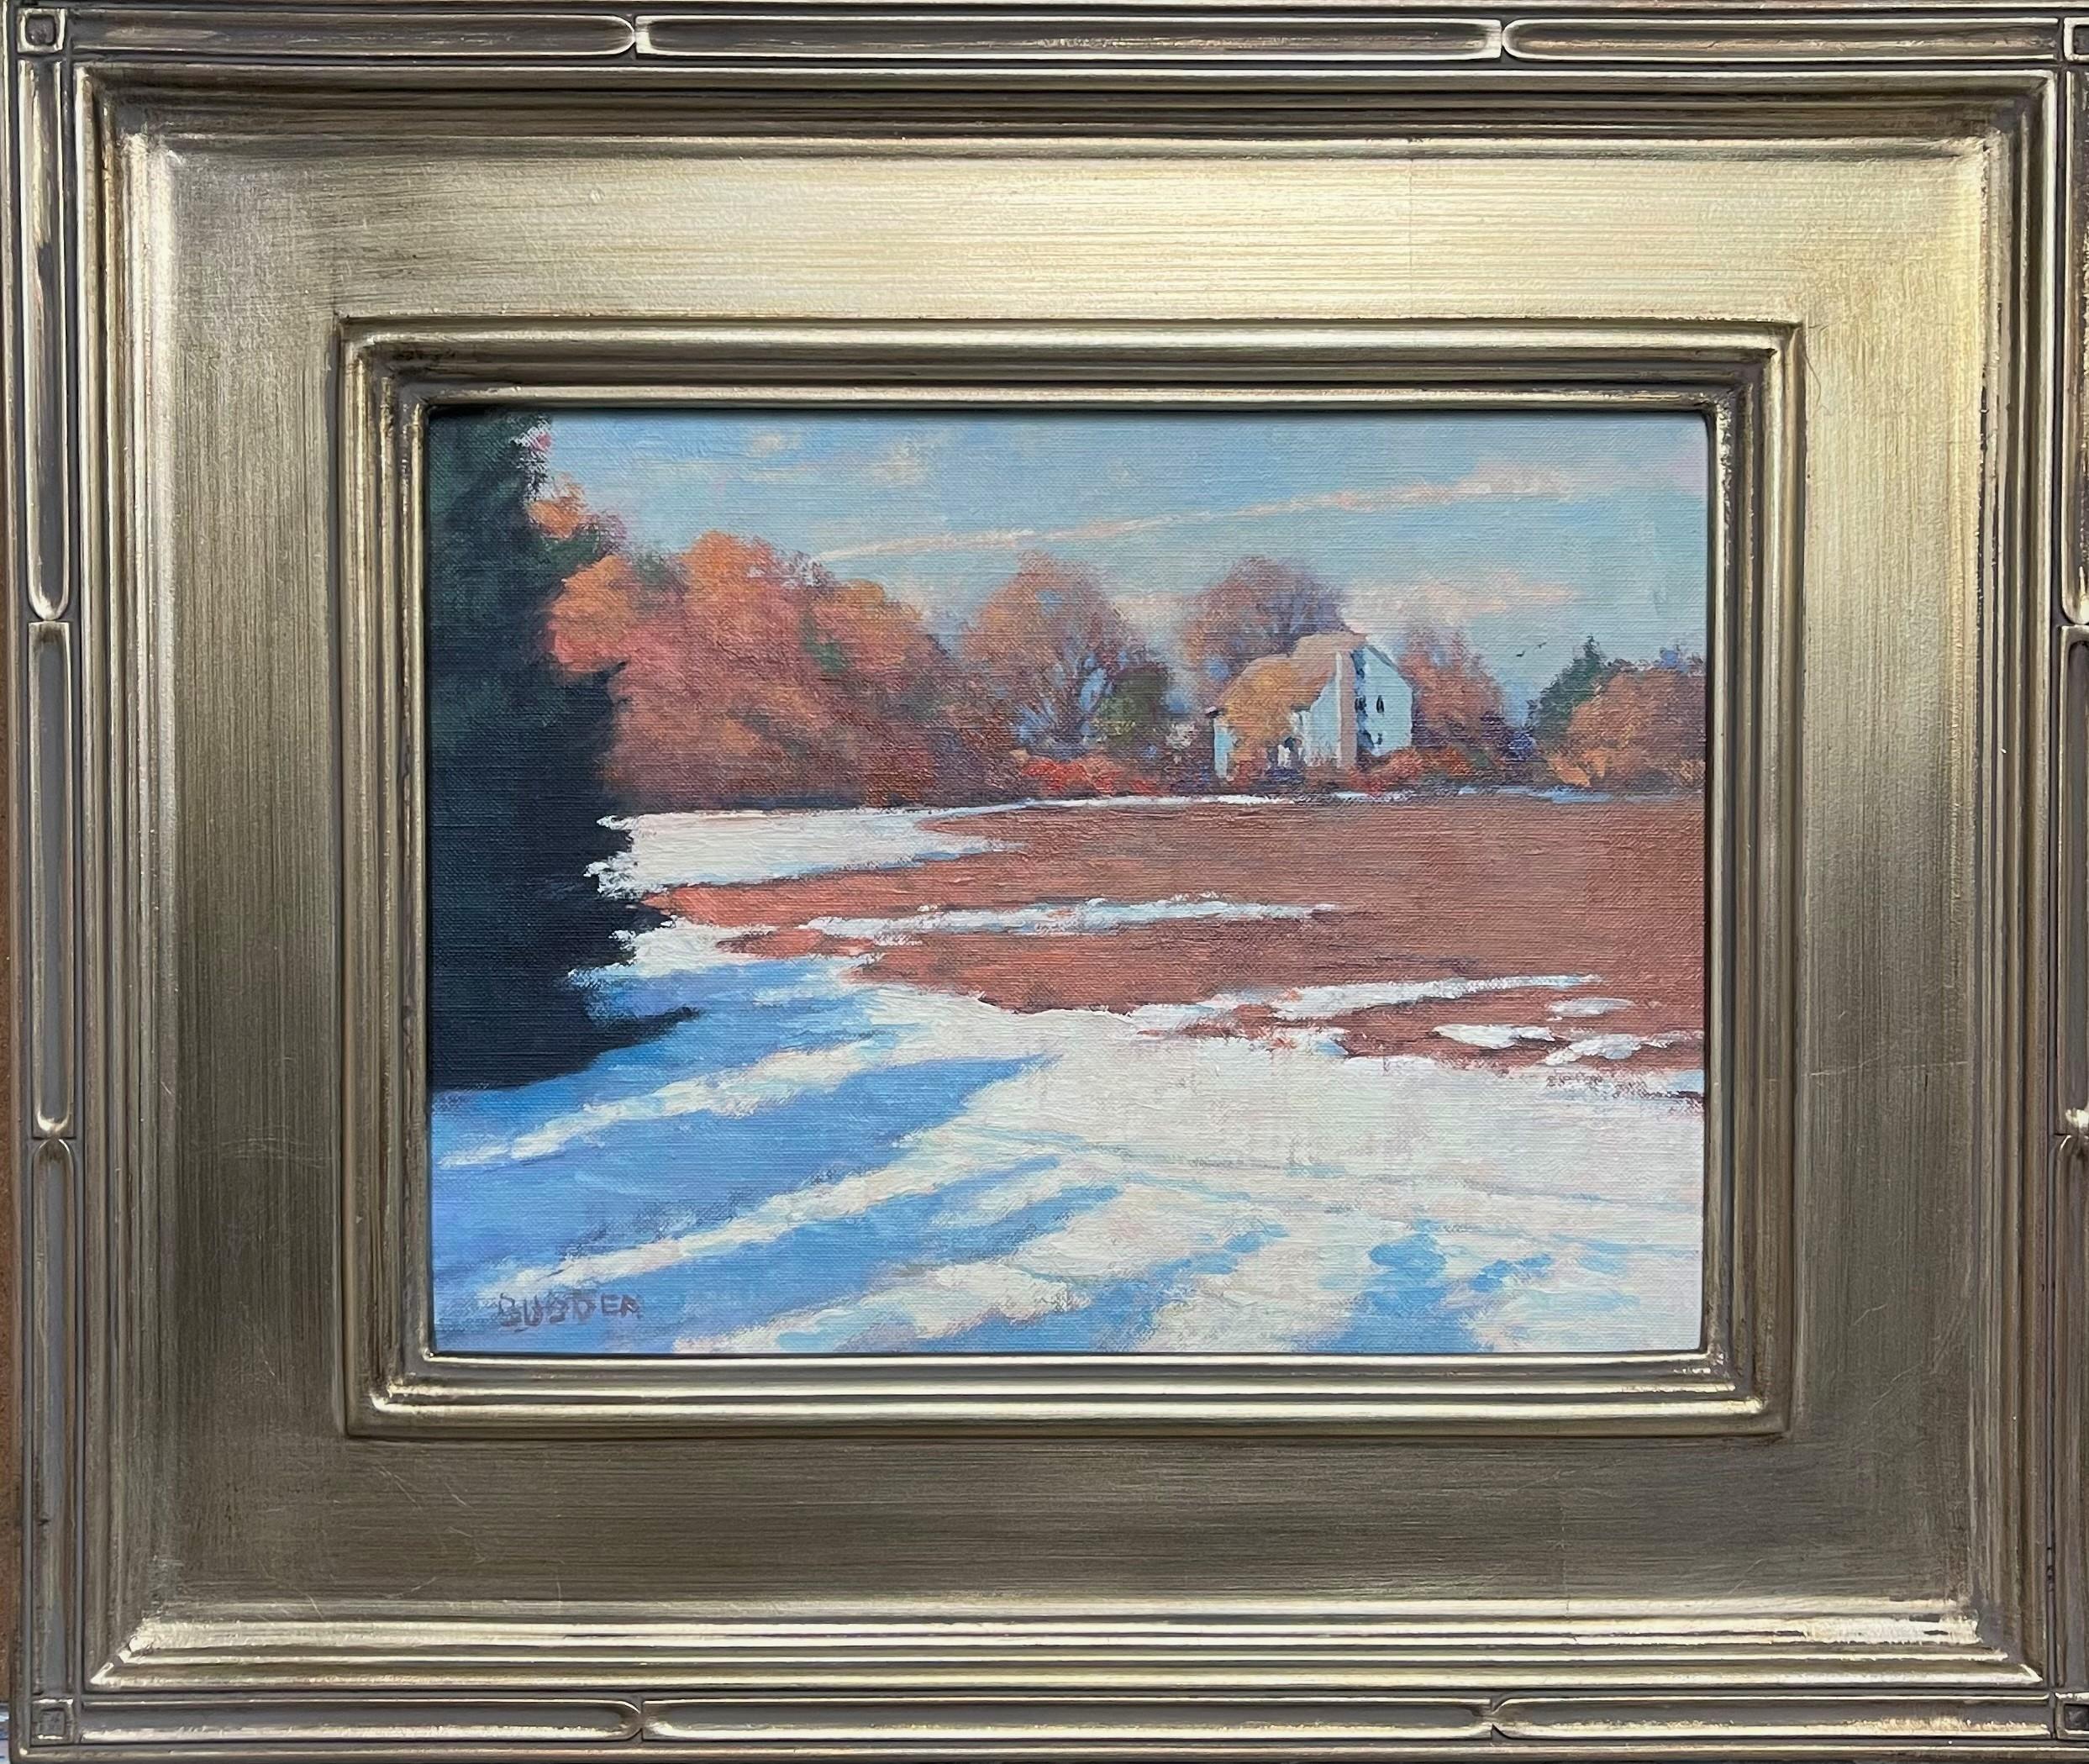 End Of Winter
oil/canvas panel
9 x 12 image
I enjoy playing with light in my paintings and creating a mood while trying to push the range of color using subtle transitions like in the snow here in this winter scene. This is a plein air painting done